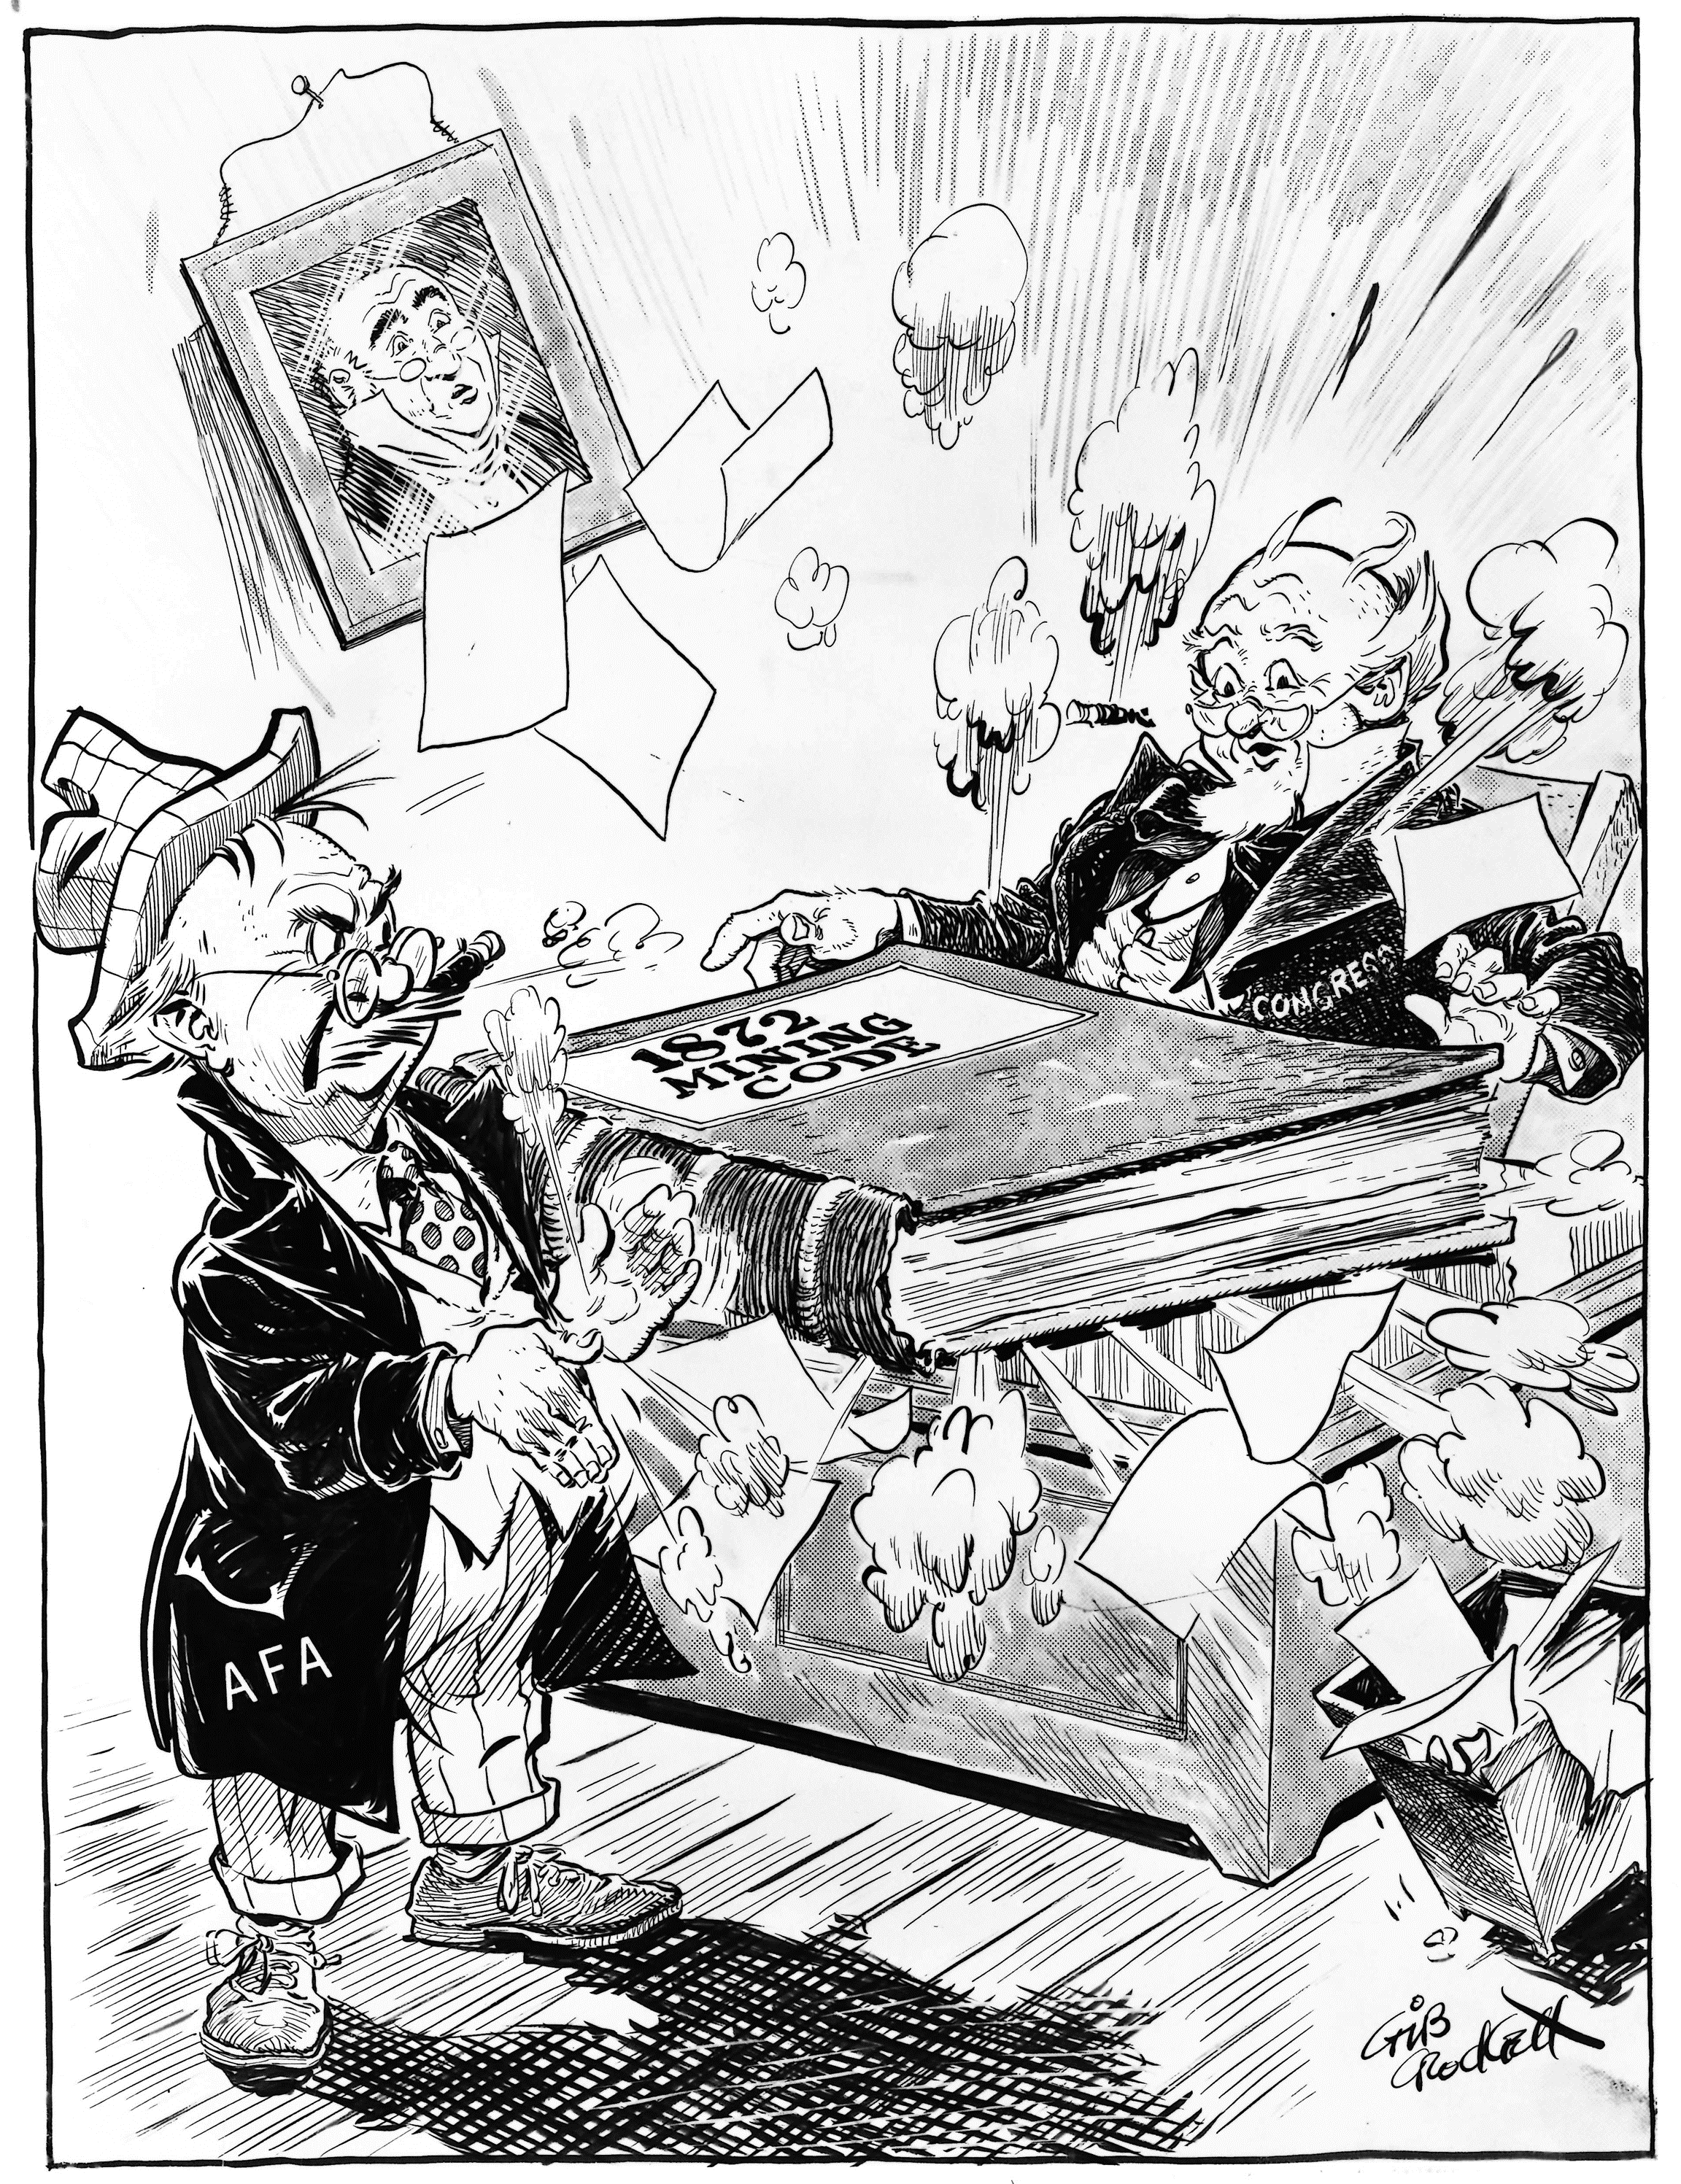 Cartoon of the AFA dropping the 1872 mining code book on congress' desk